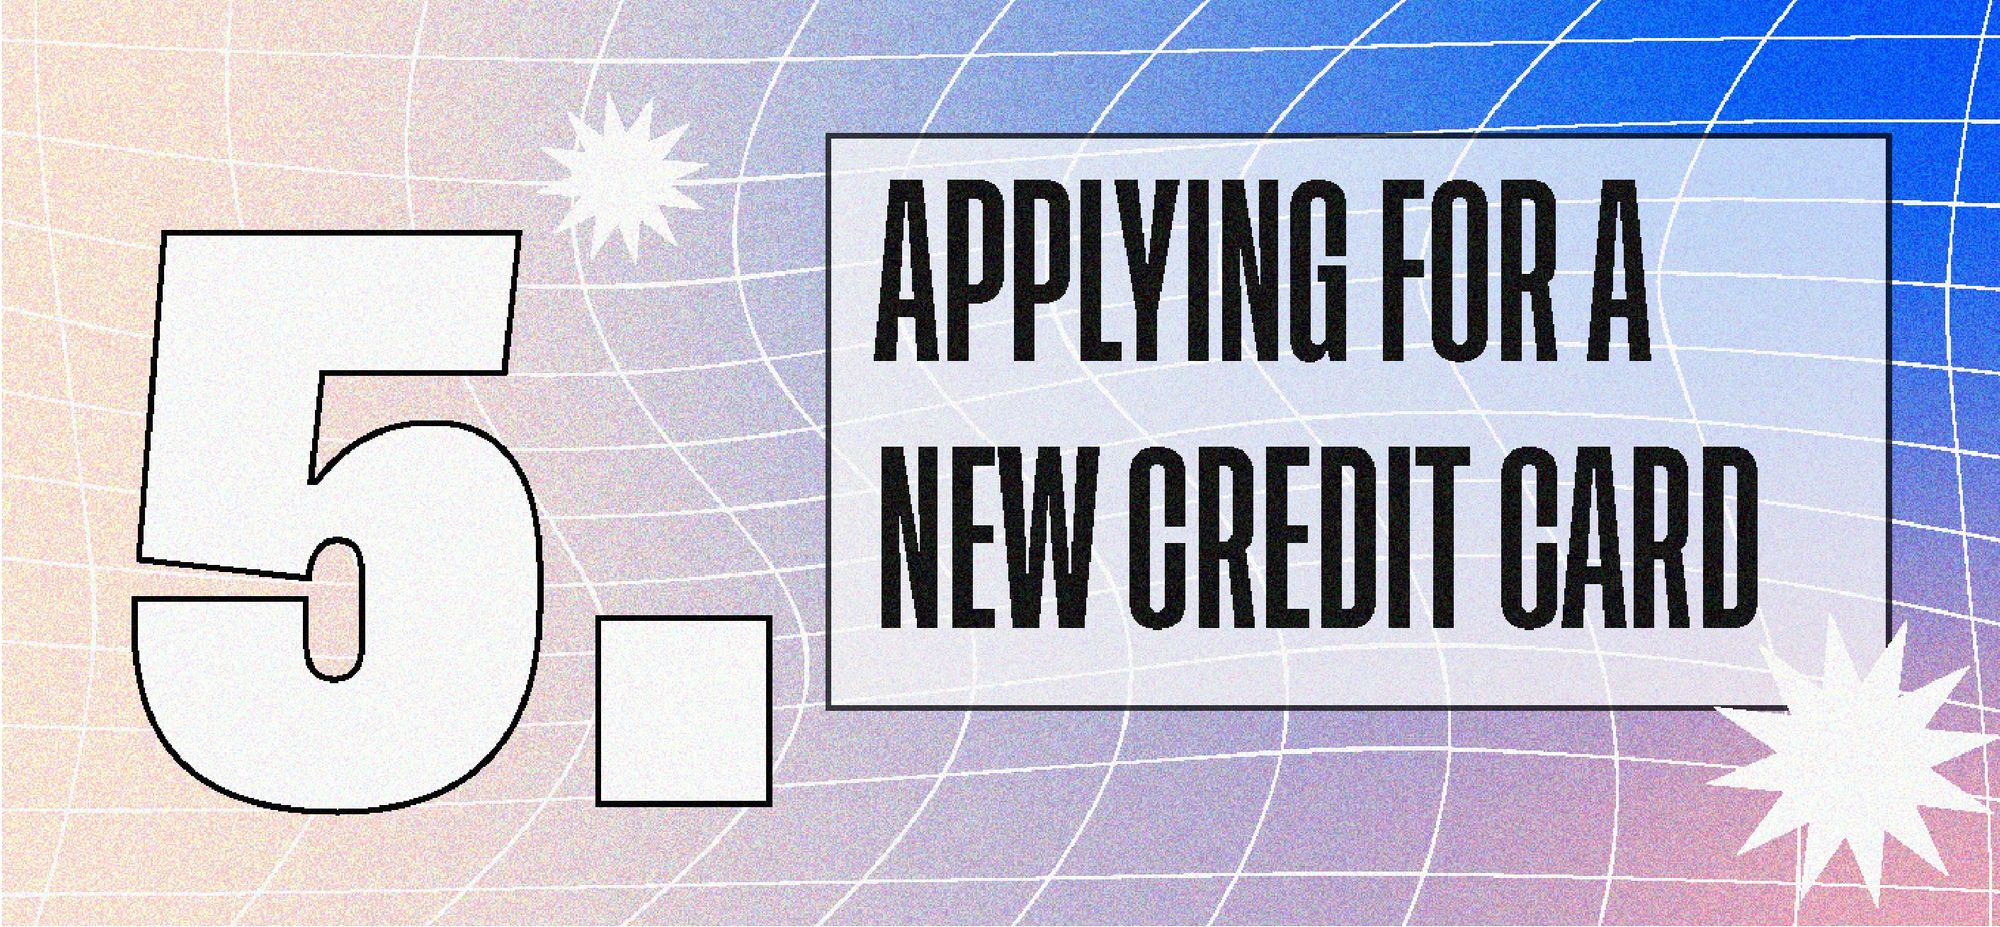 Applying For A New Credit Card